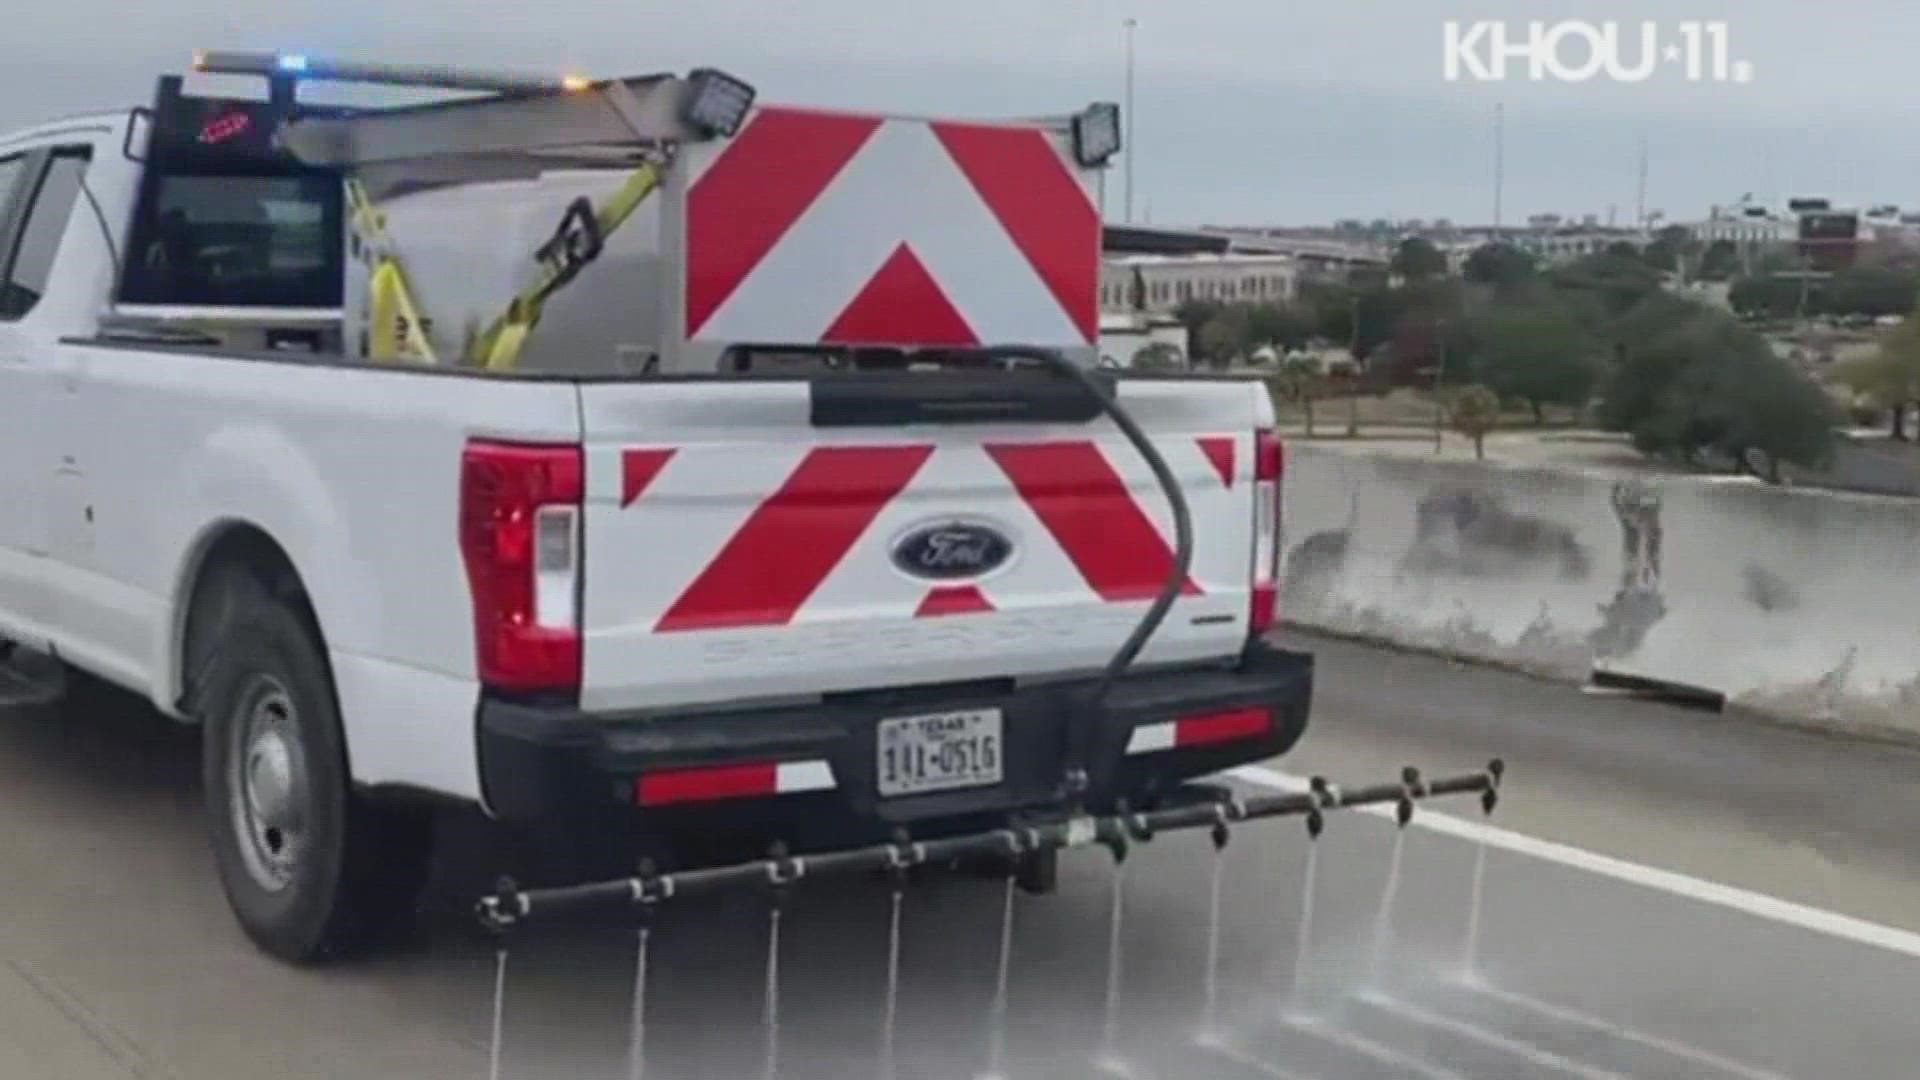 TxDOT crews are pretreating bridges and overpasses across the Houston area -- just in case they get slick from the cold rain and possibly sleet.